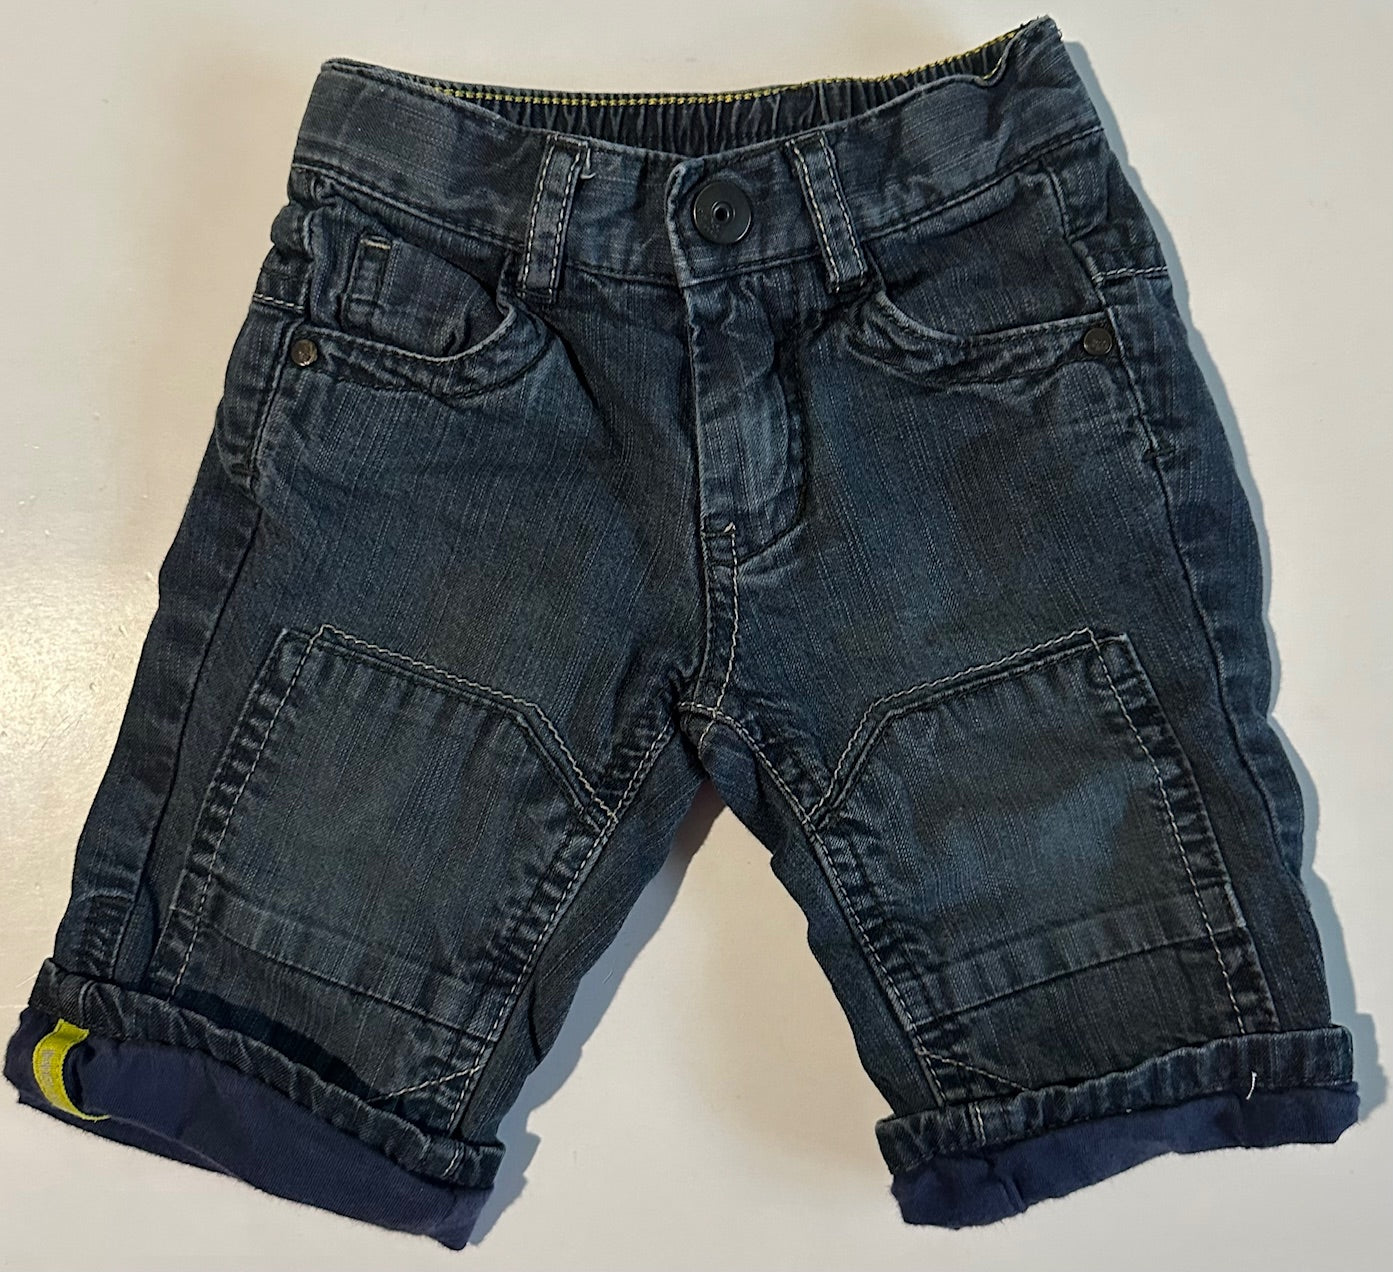 Mexx, Faded Black Lined Pants - 3-6 Months